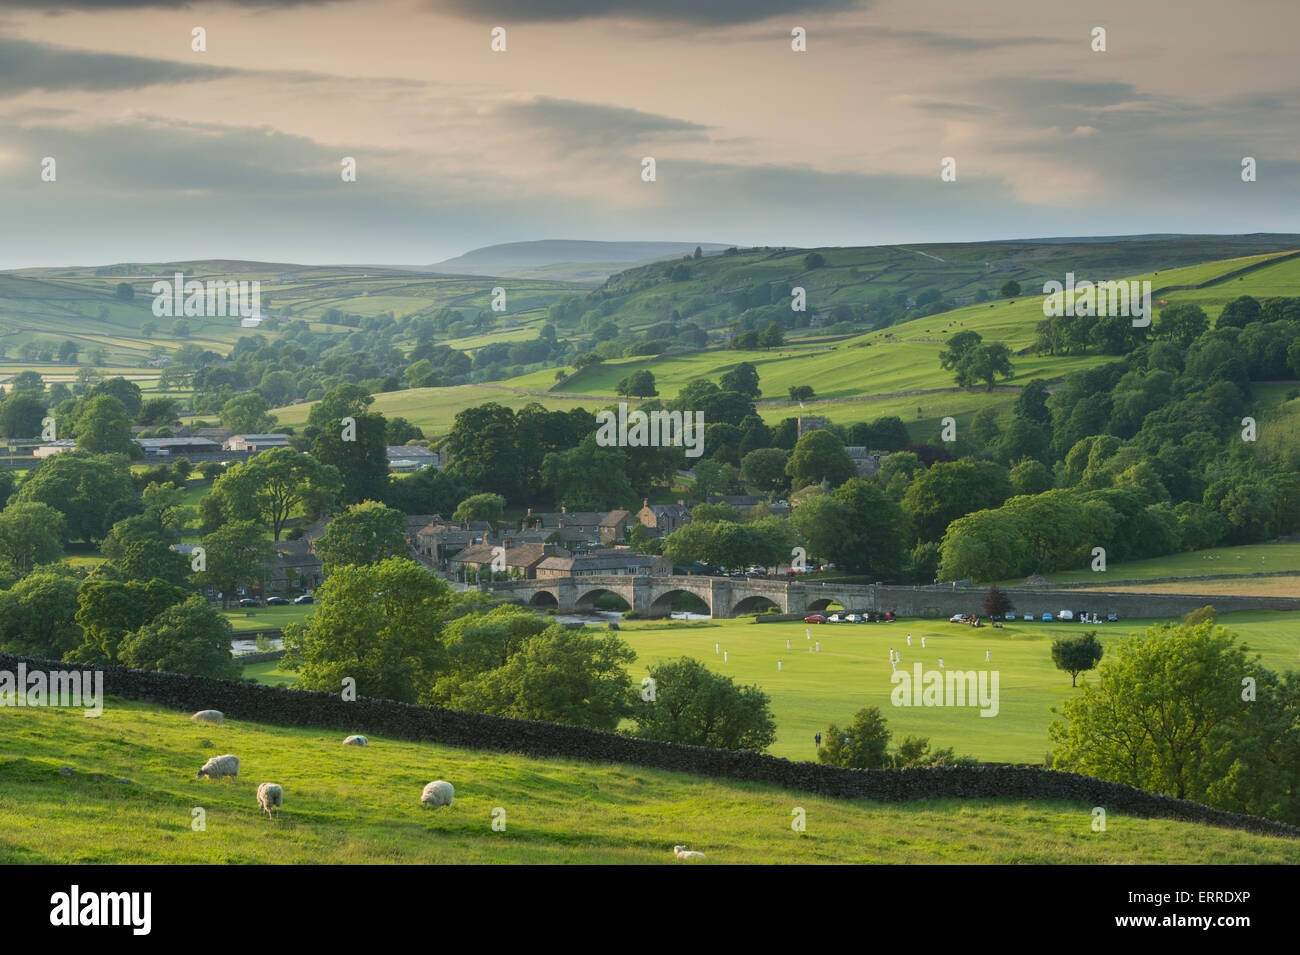 Rural idyll - beautiful scenic hilly countryside & traditional village cricket match on sunny summer evening - Burnsall, Yorkshire Dales, England, UK. Stock Photo